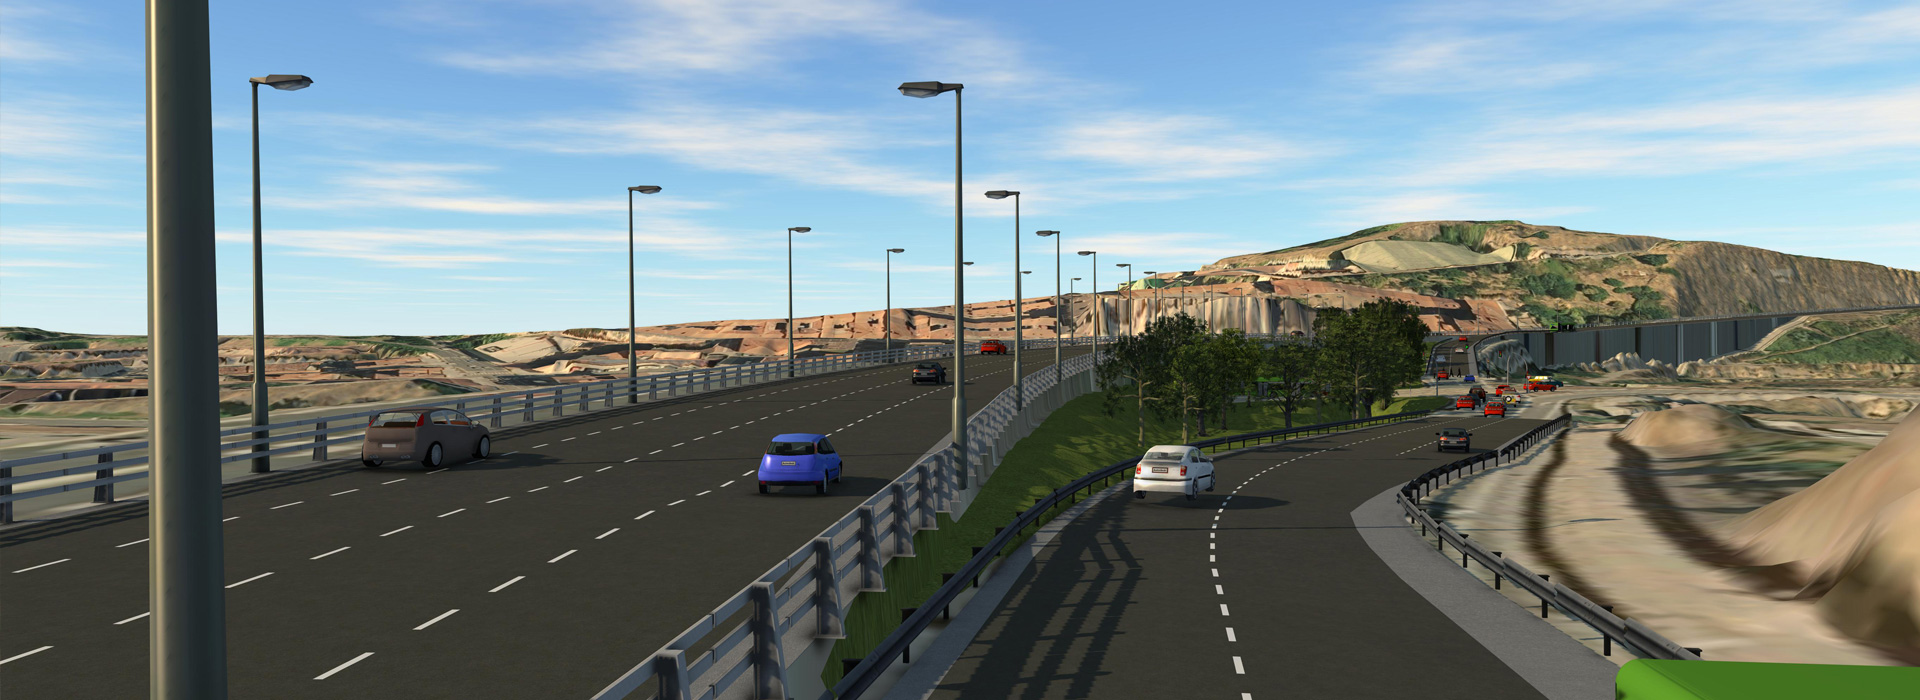 TRAFFIC-CALMING ON THE CRUCES-RONTEGUI ROAD INTERCHANGE - 2